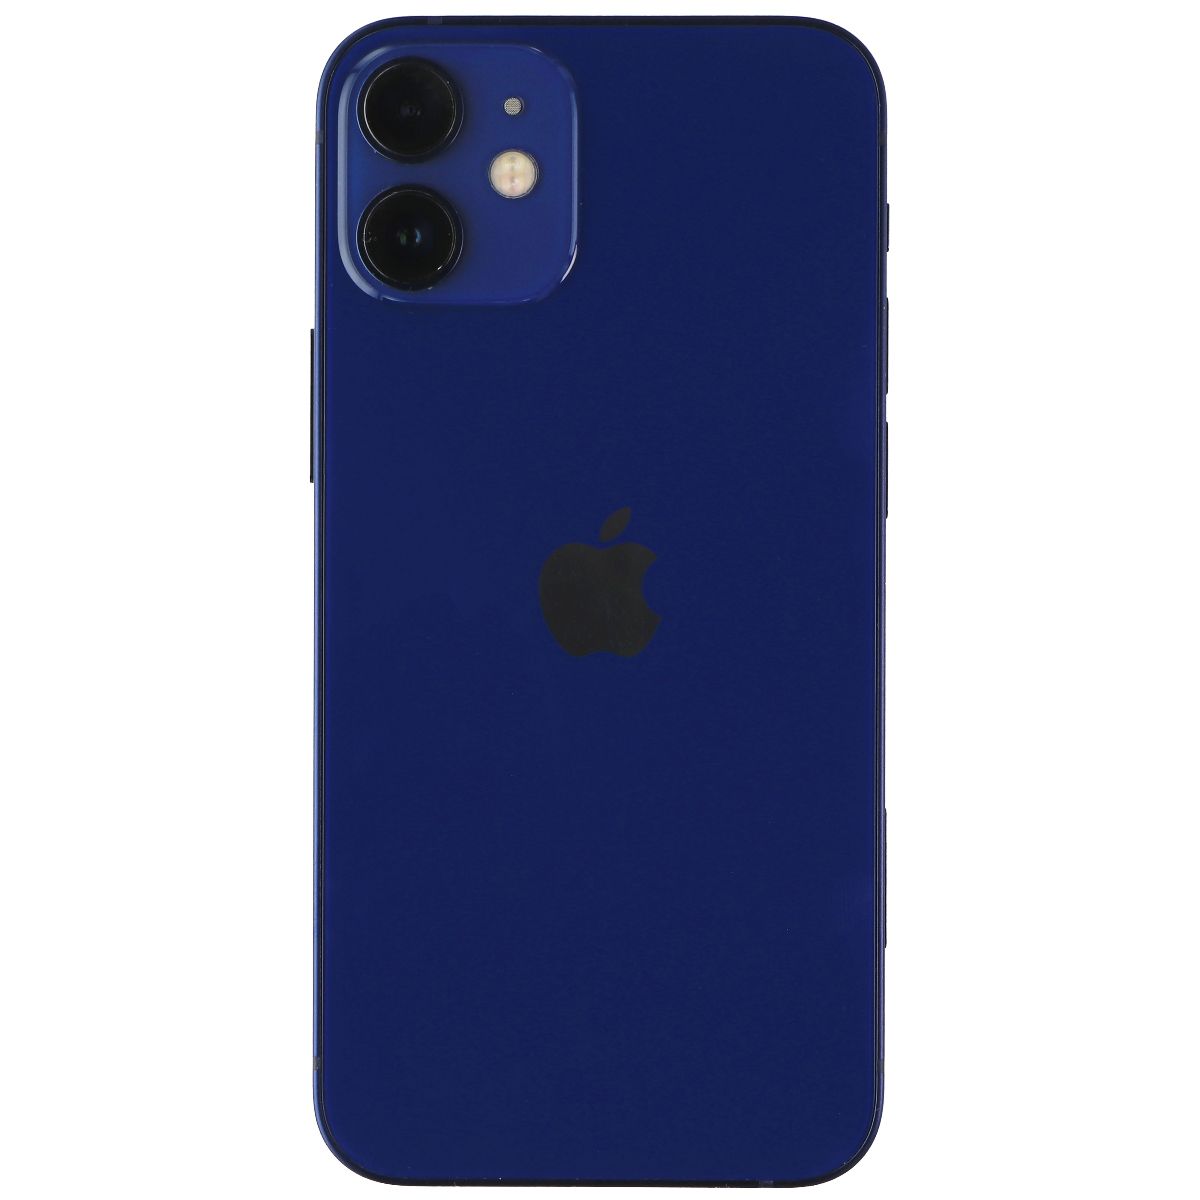 Apple iPhone 12 Mini (5.4-in) (A2176) AT&T Only - 128GB/Blue - BAD PROX SENSOR* Cell Phones & Smartphones Apple    - Simple Cell Bulk Wholesale Pricing - USA Seller